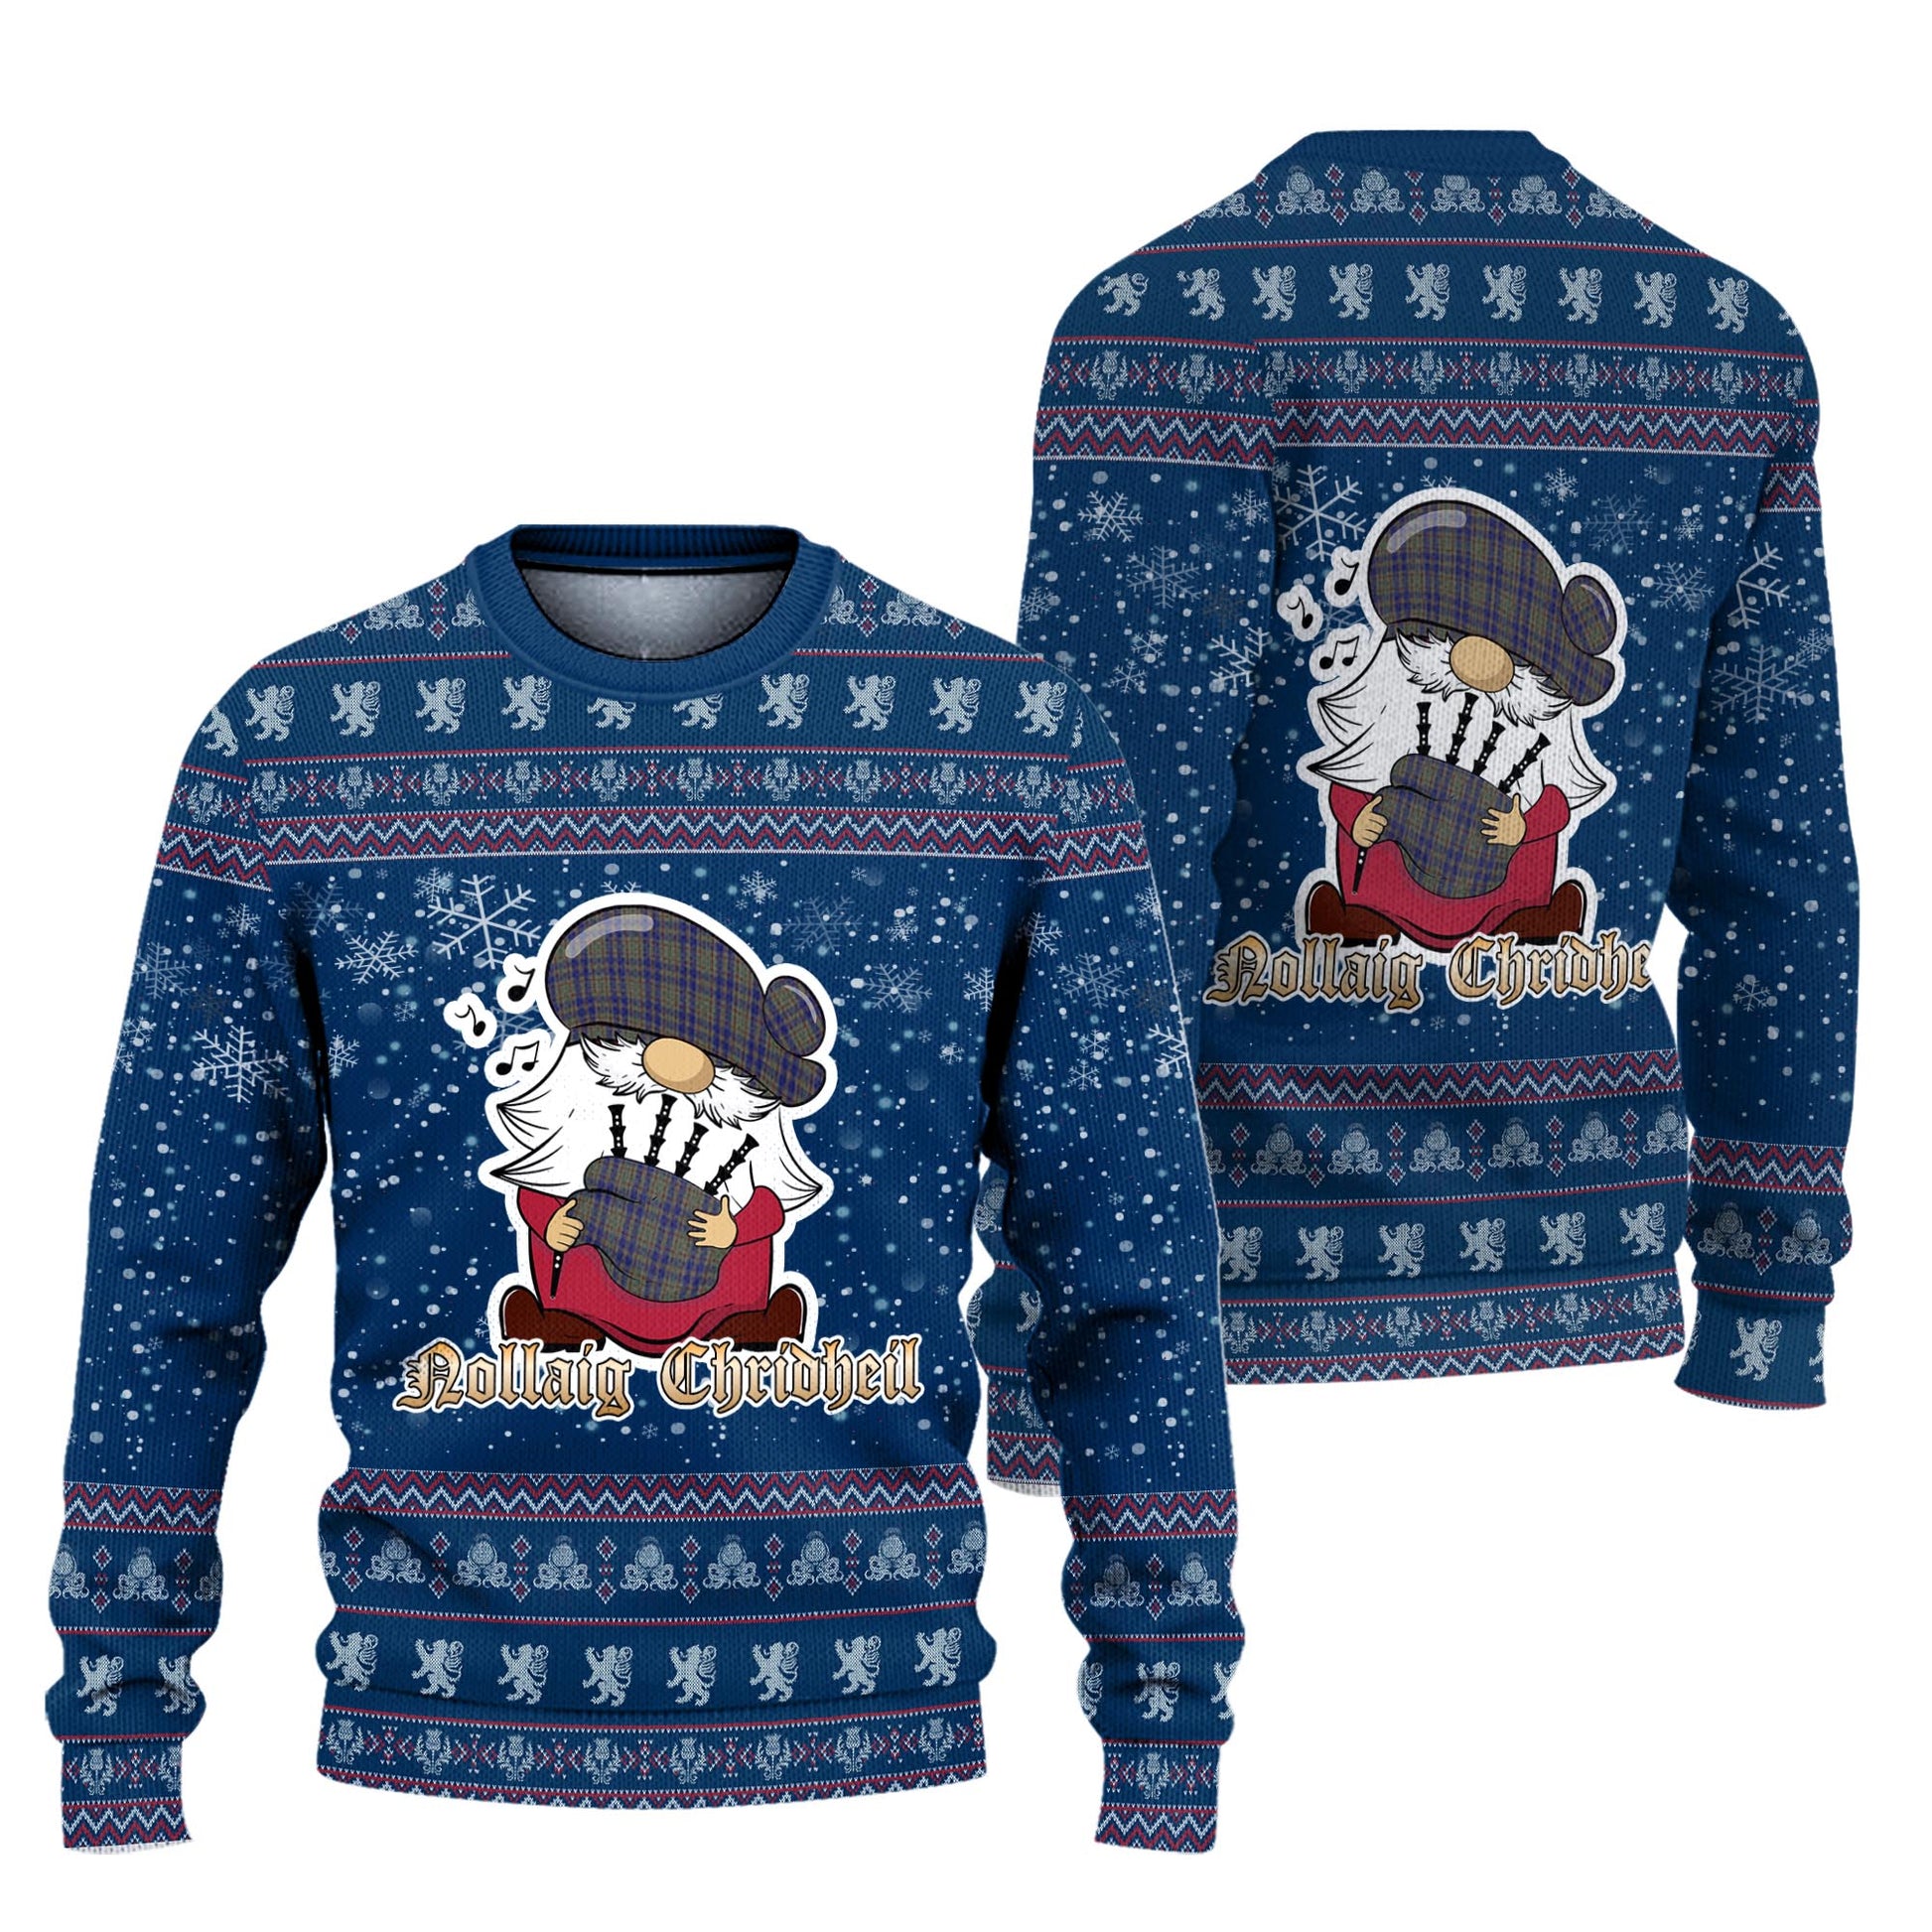 Kildare County Ireland Clan Christmas Family Knitted Sweater with Funny Gnome Playing Bagpipes Unisex Blue - Tartanvibesclothing